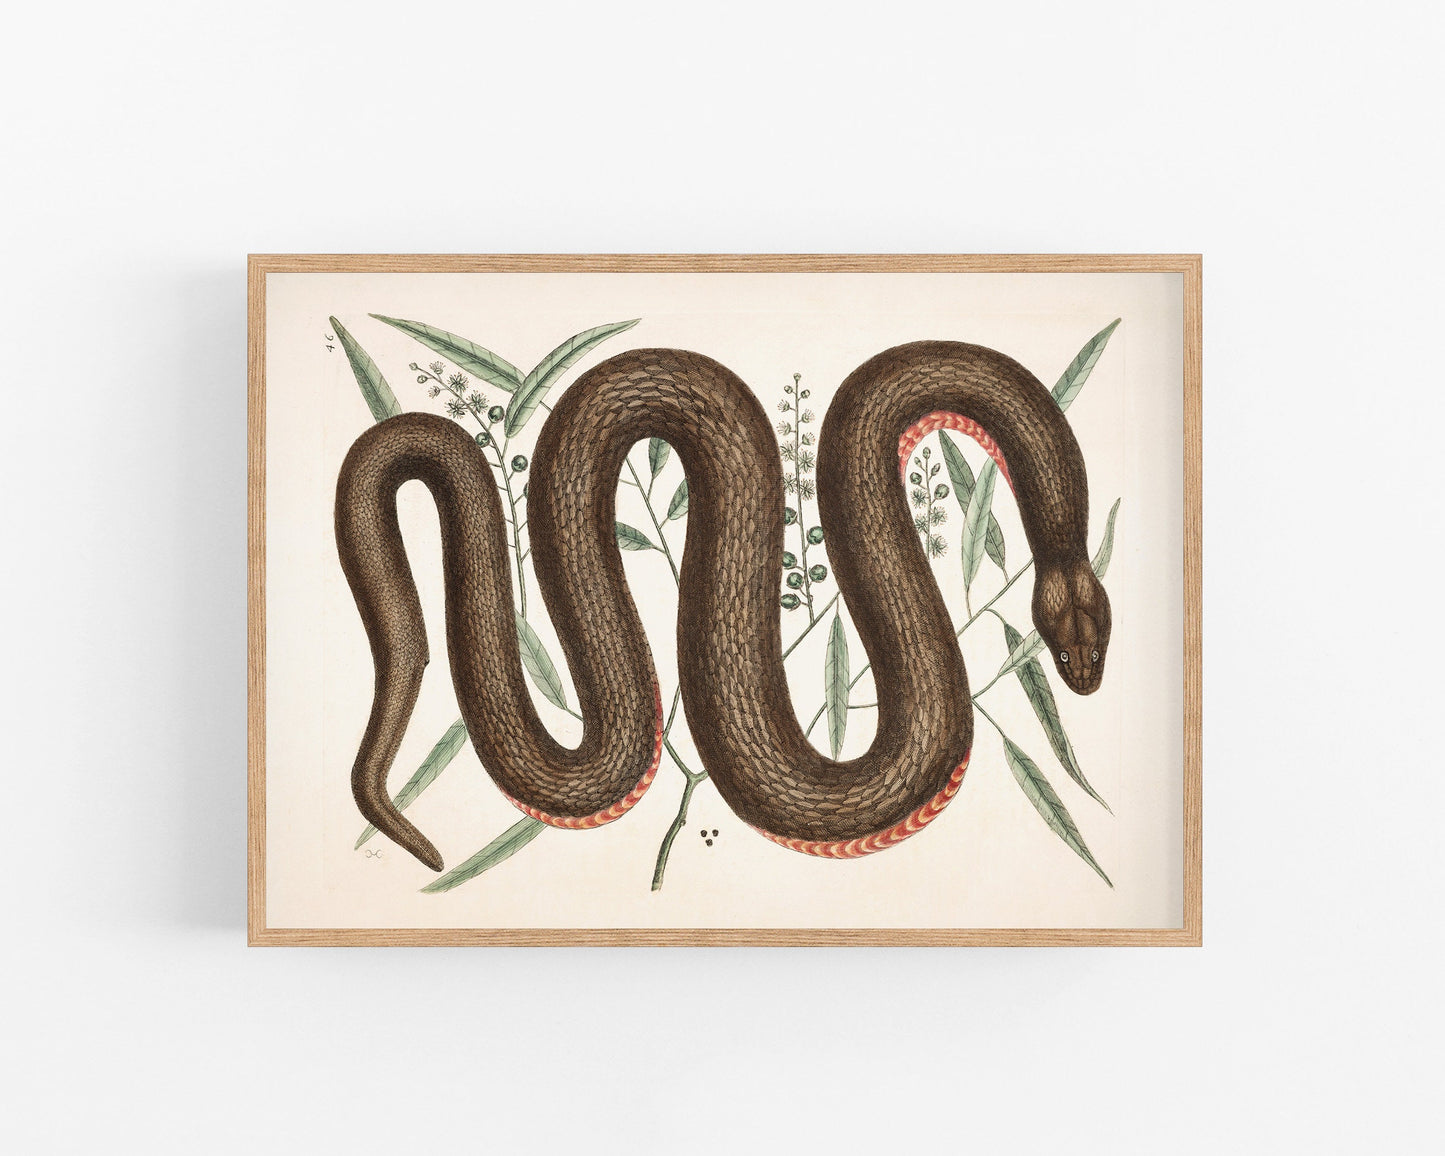 Copper belly snake | Antique Mark Catesby | Natural history of Carolina art | Modern vintage décor | Eco-friendly gift